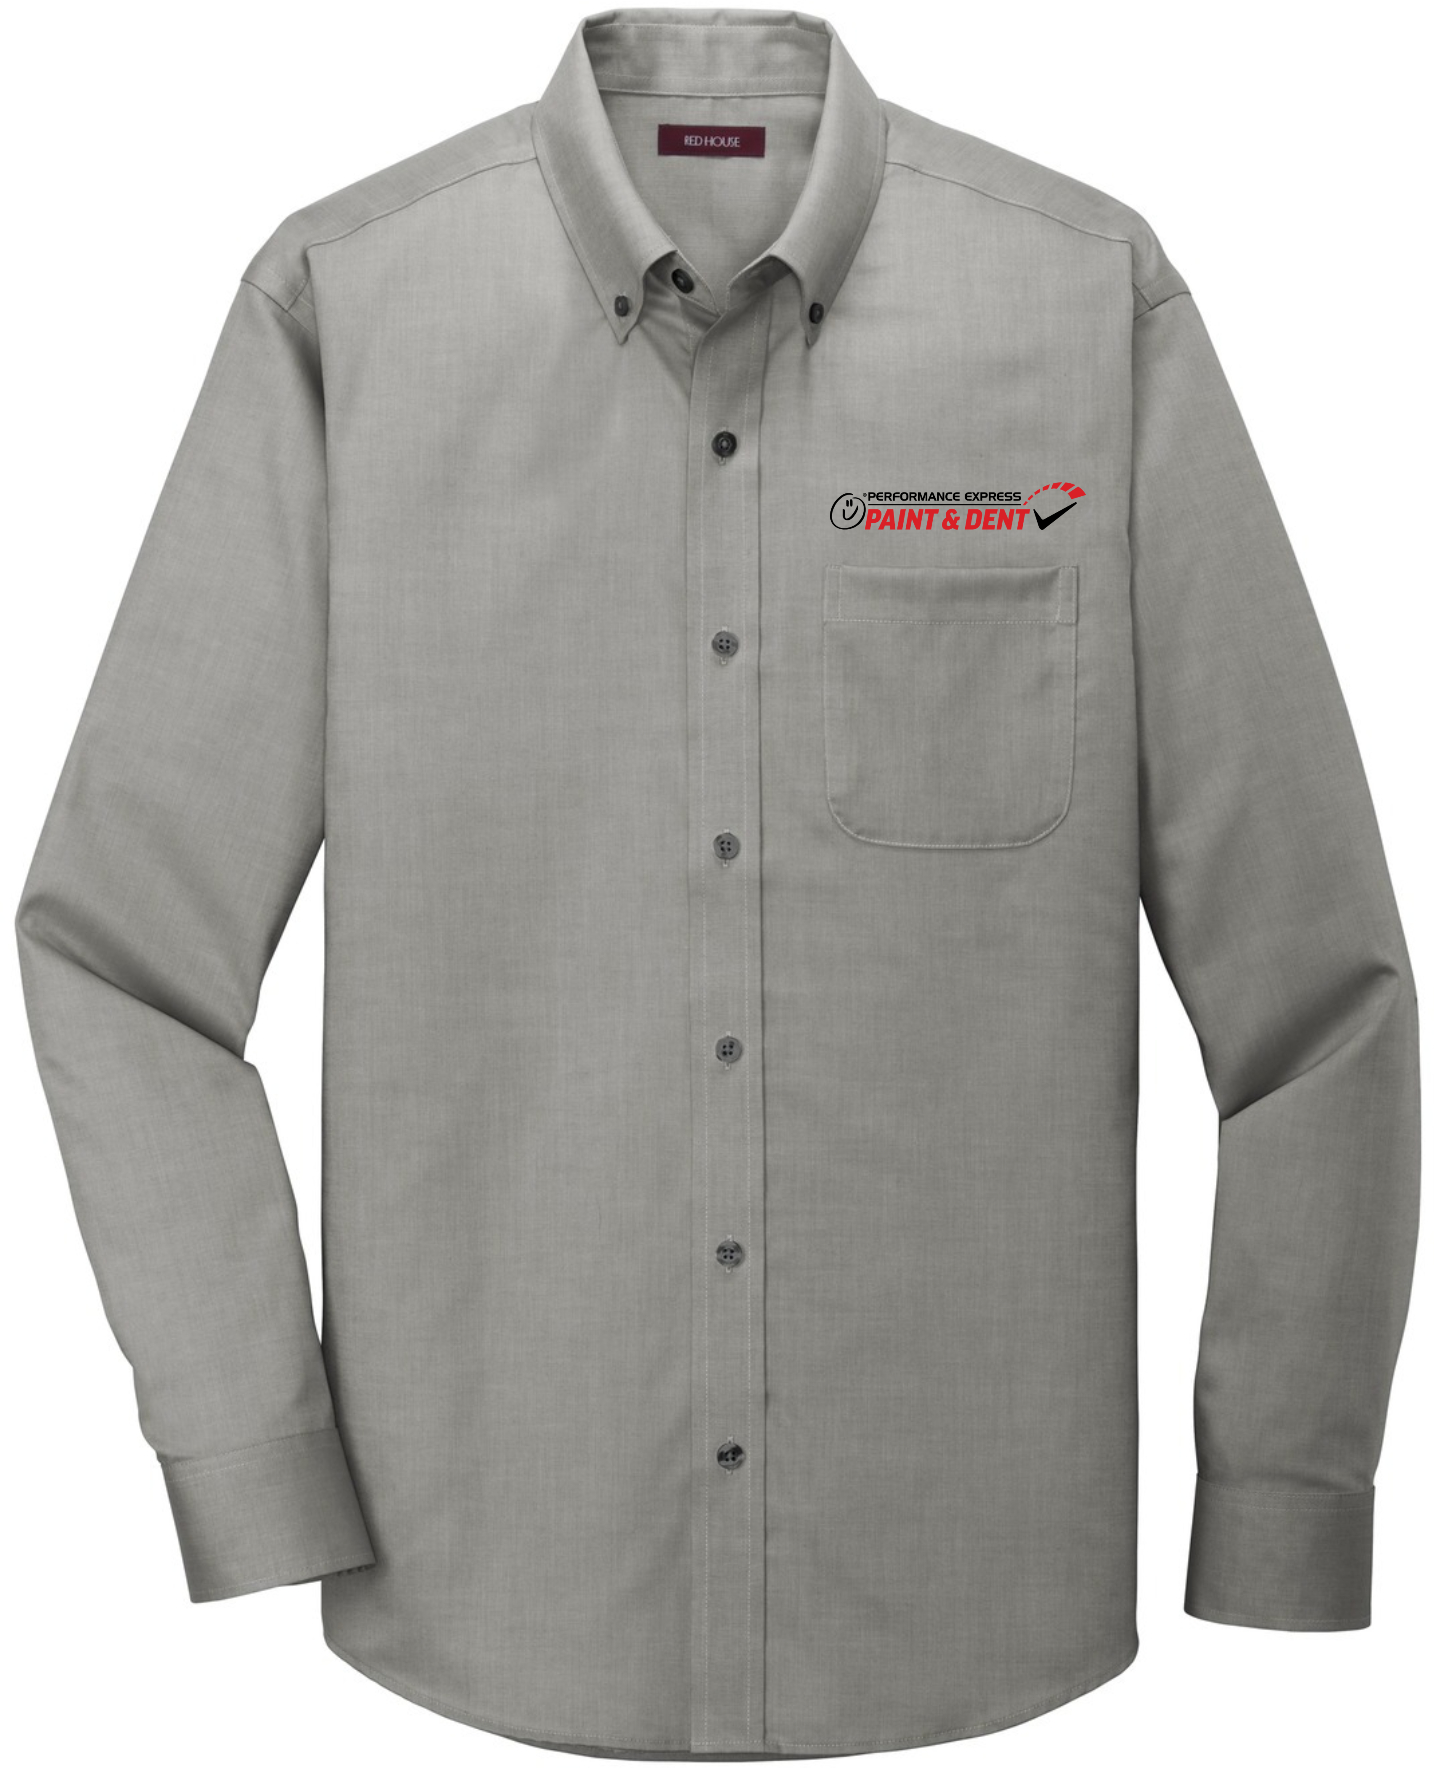 Performance Paint & Dent - RH240 Red House® Pinpoint Oxford Non-Iron Shirt